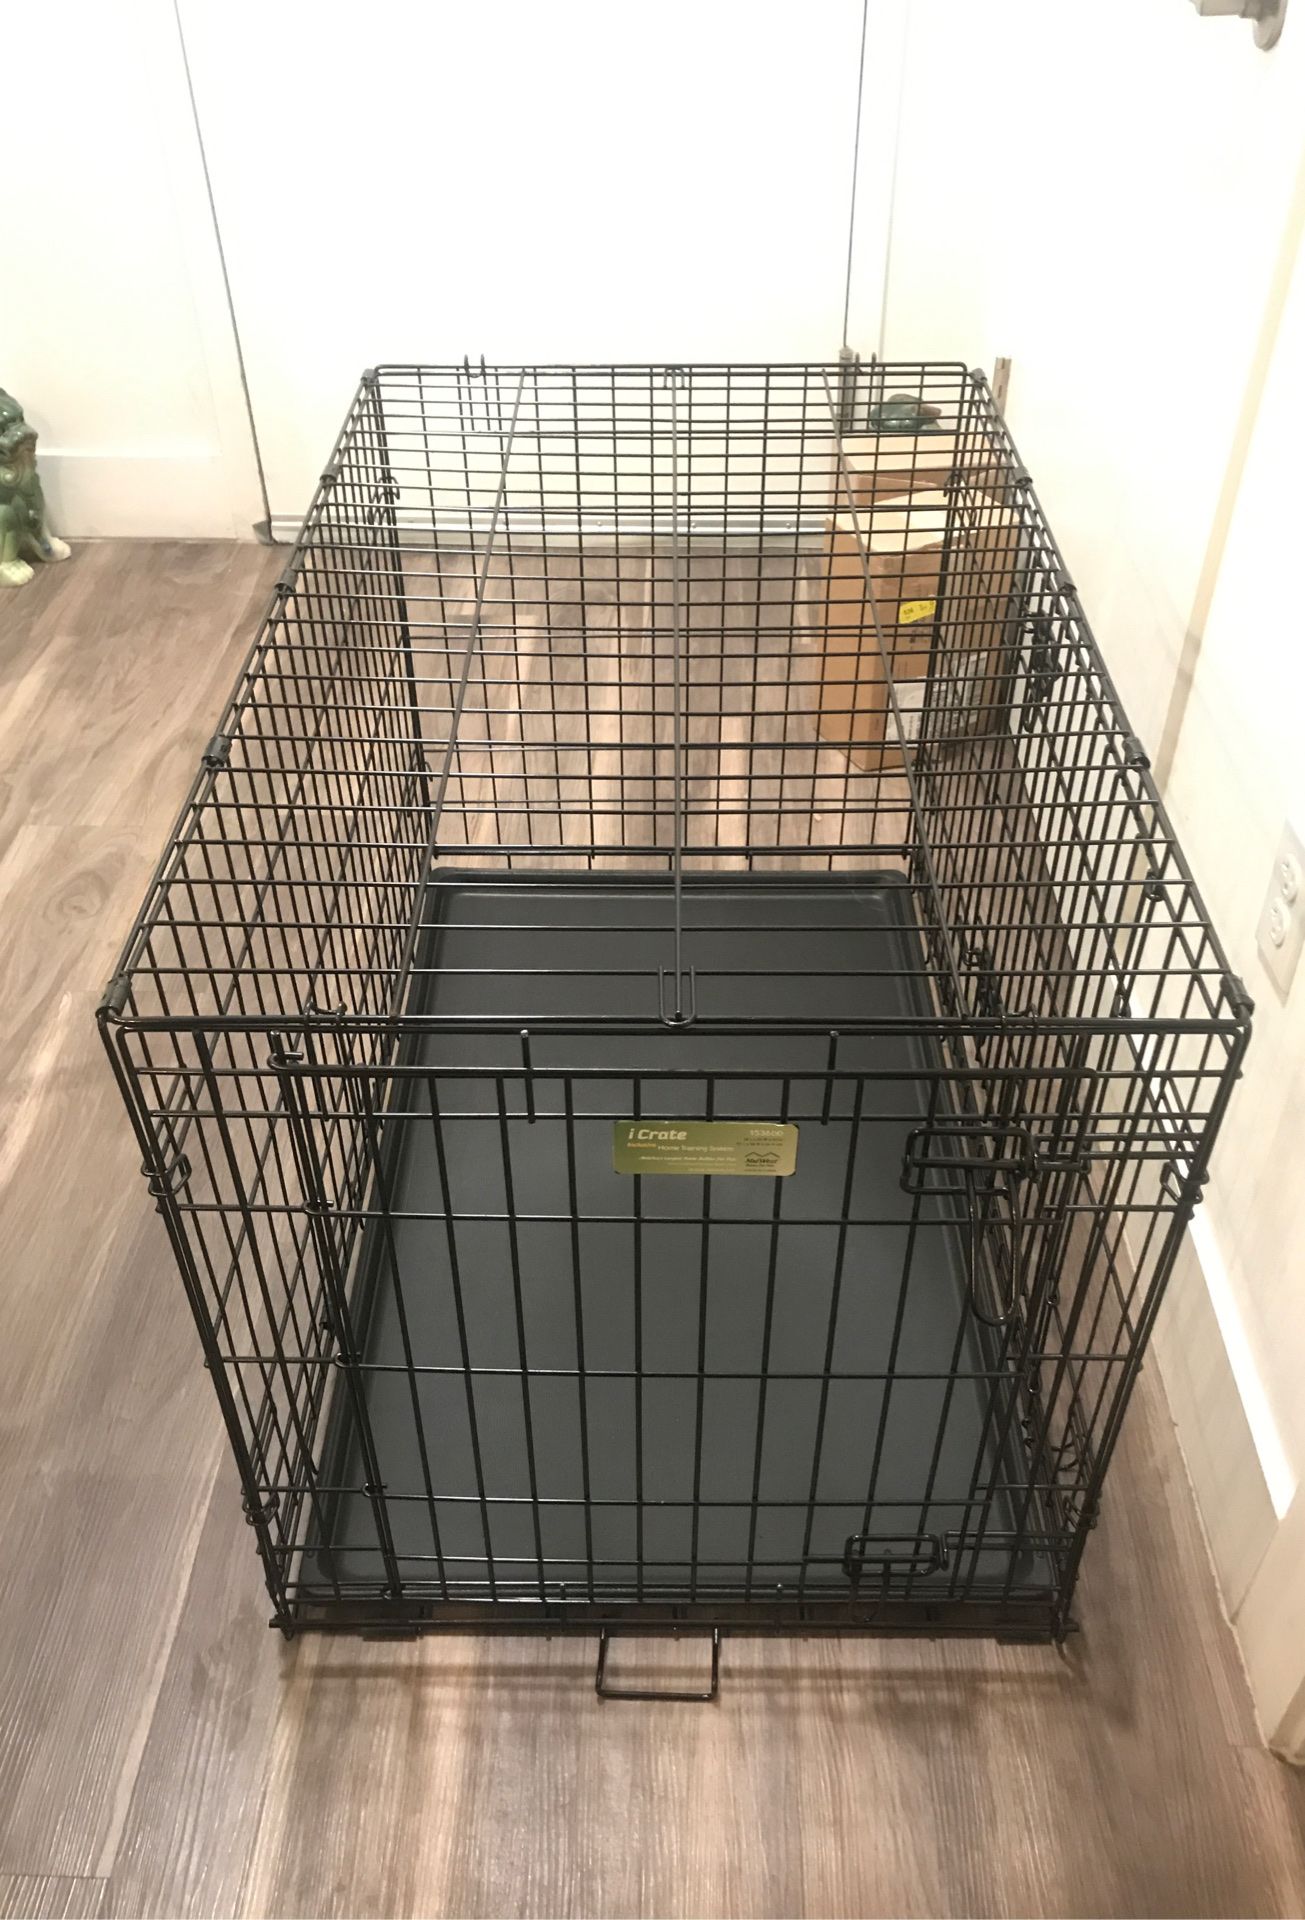 Icrate Large Fold & Carry 36Lx23Wx25H Midwest homes for pet. Great Condition.